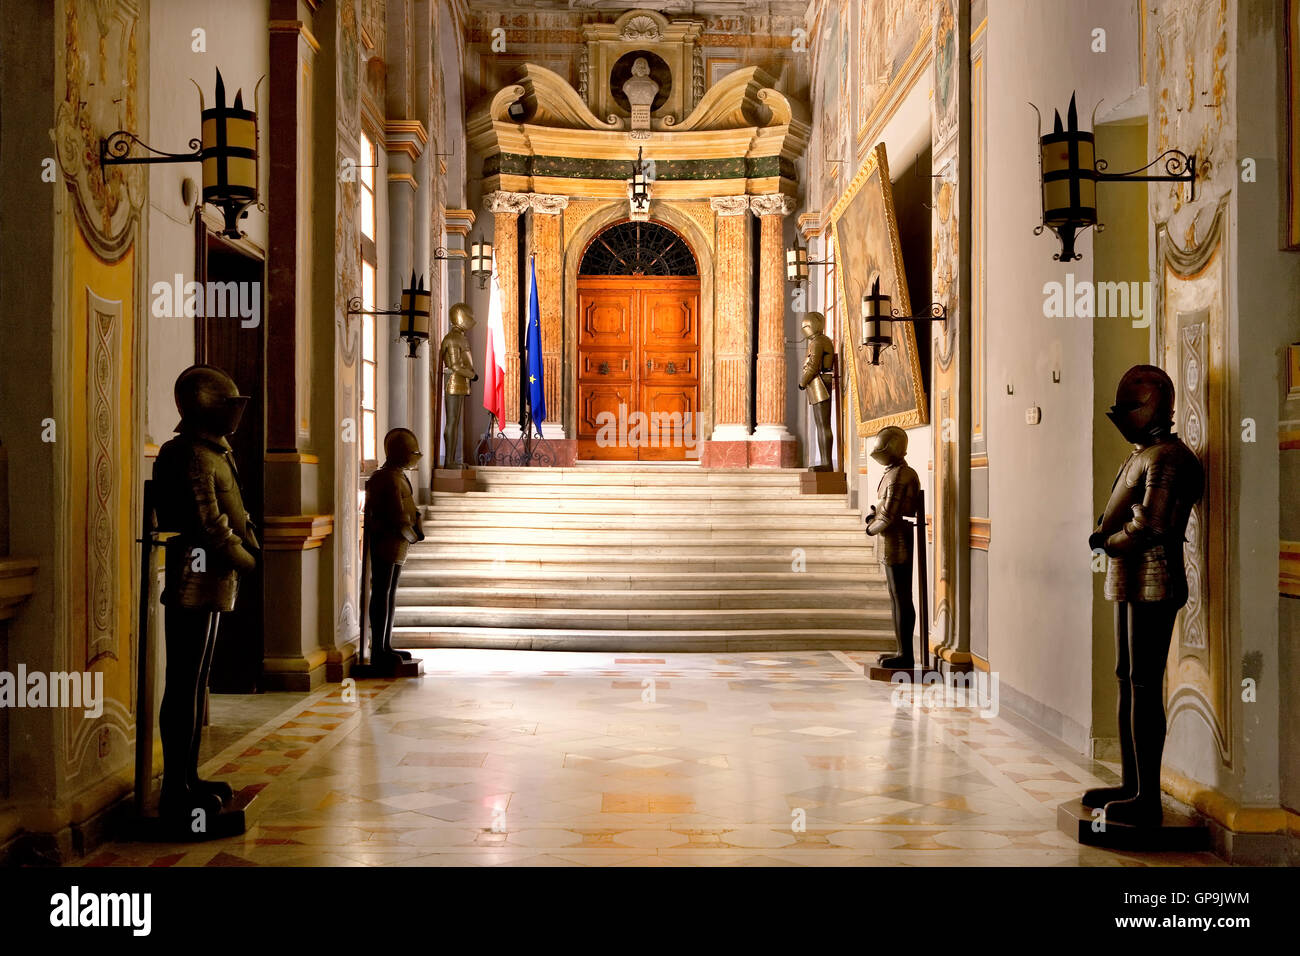 The Grand Master Palace in Valletta, Malta Editorial Photography